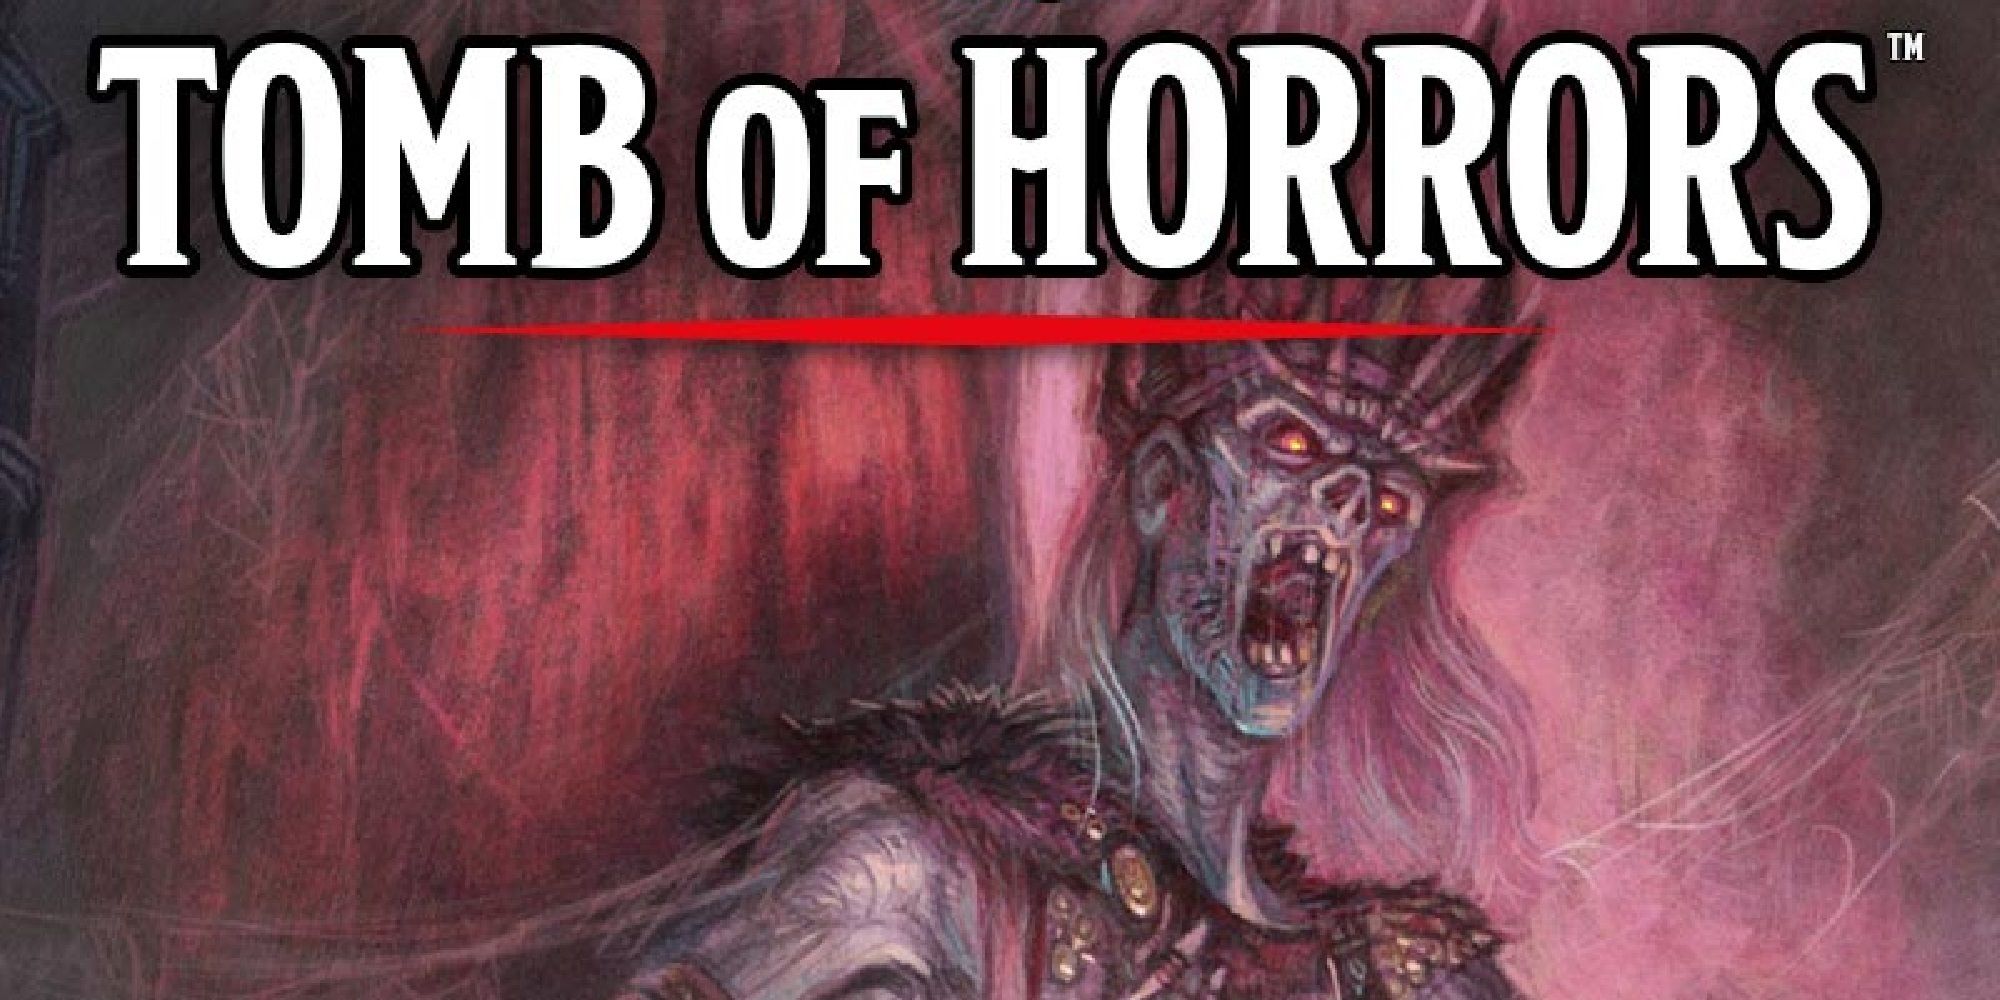 The cover of the Tomb of Horrors campaign module for D&D